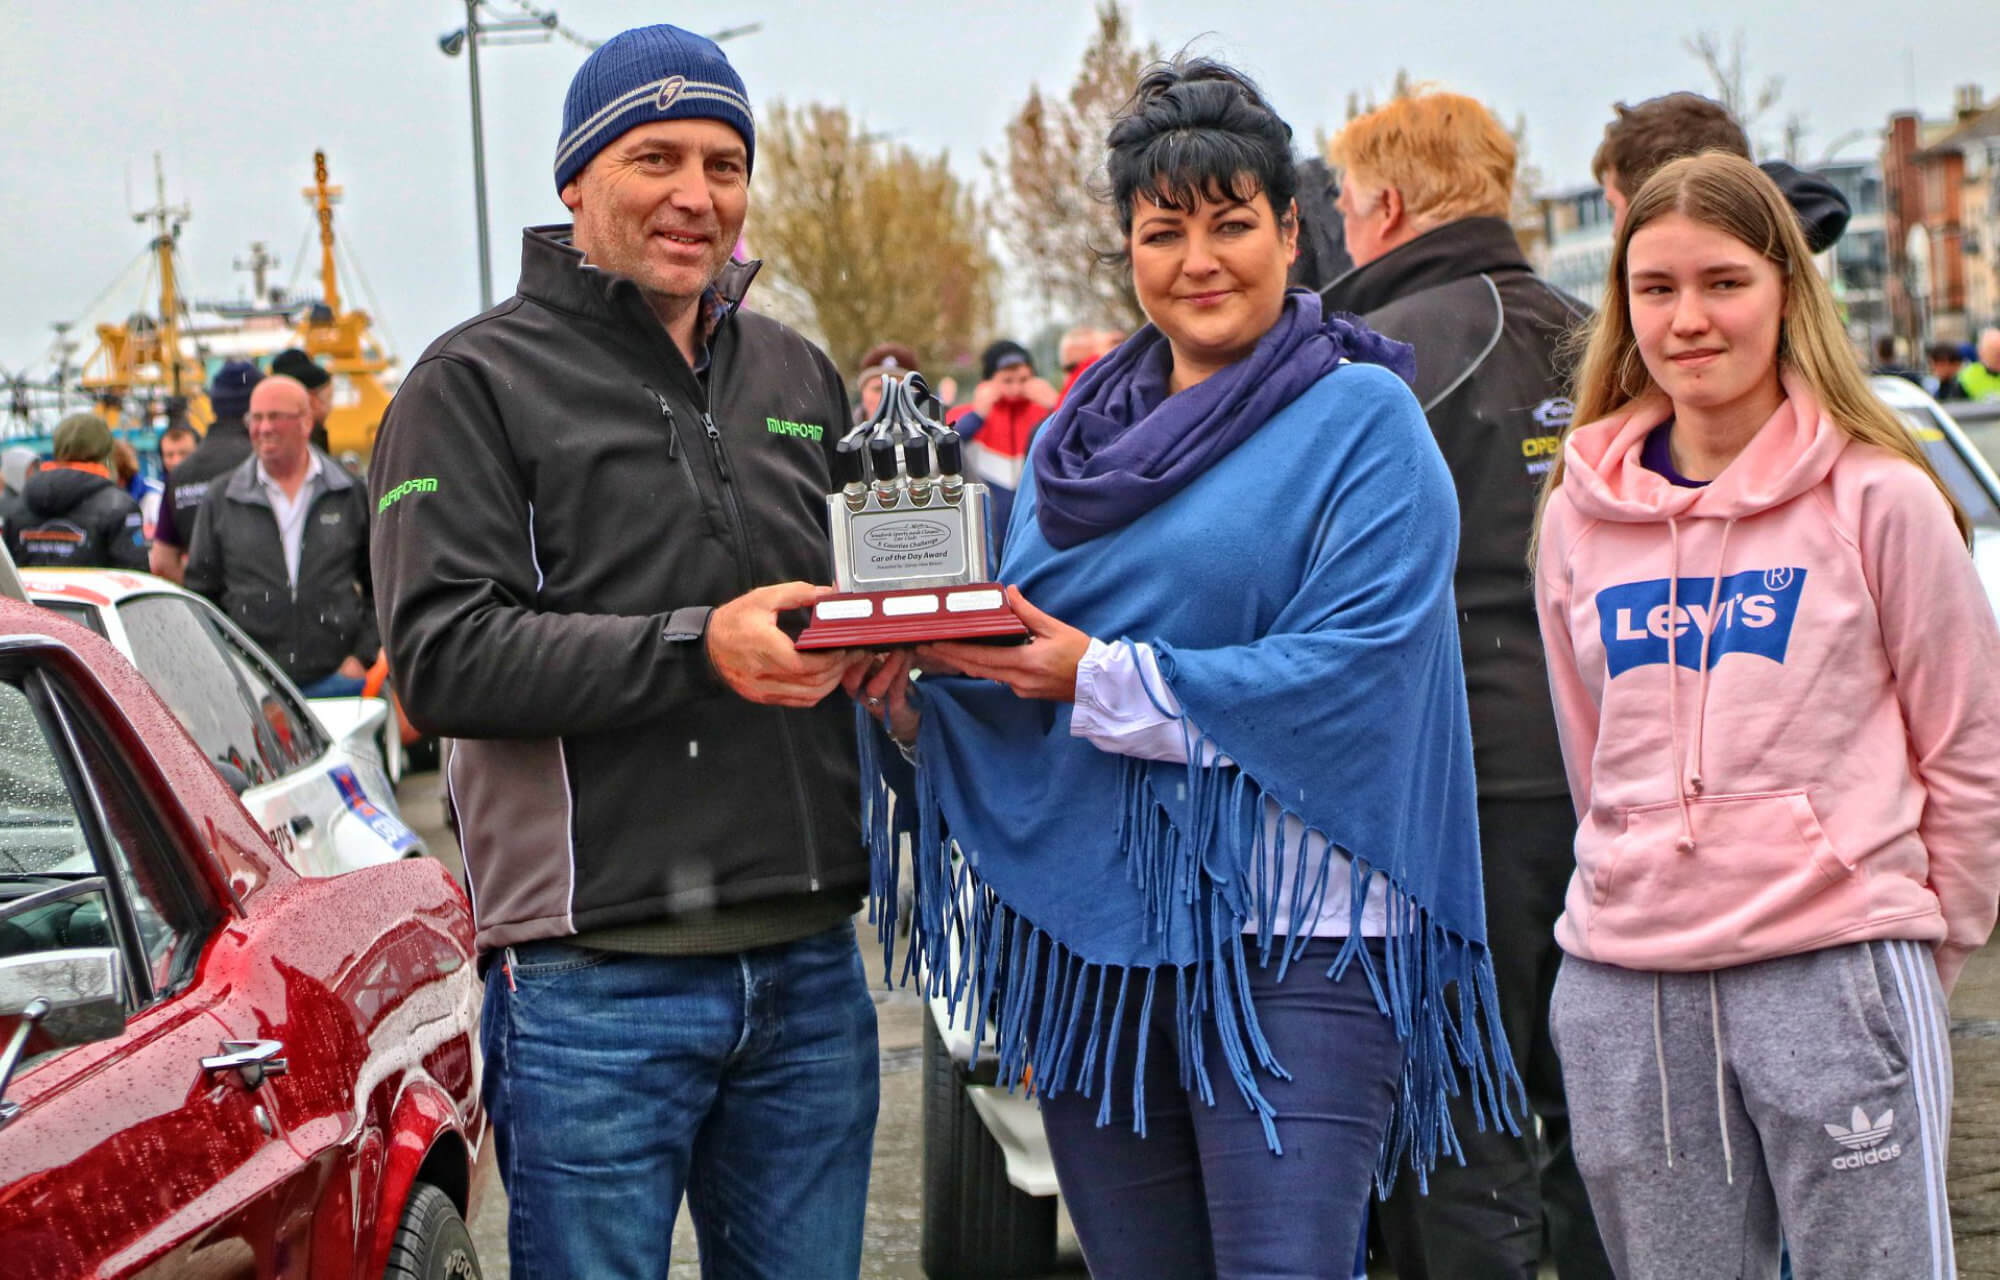 Margo presenting the Slaney View Honda Perpetual Trophy to Larry Murphy and his daughter Lara